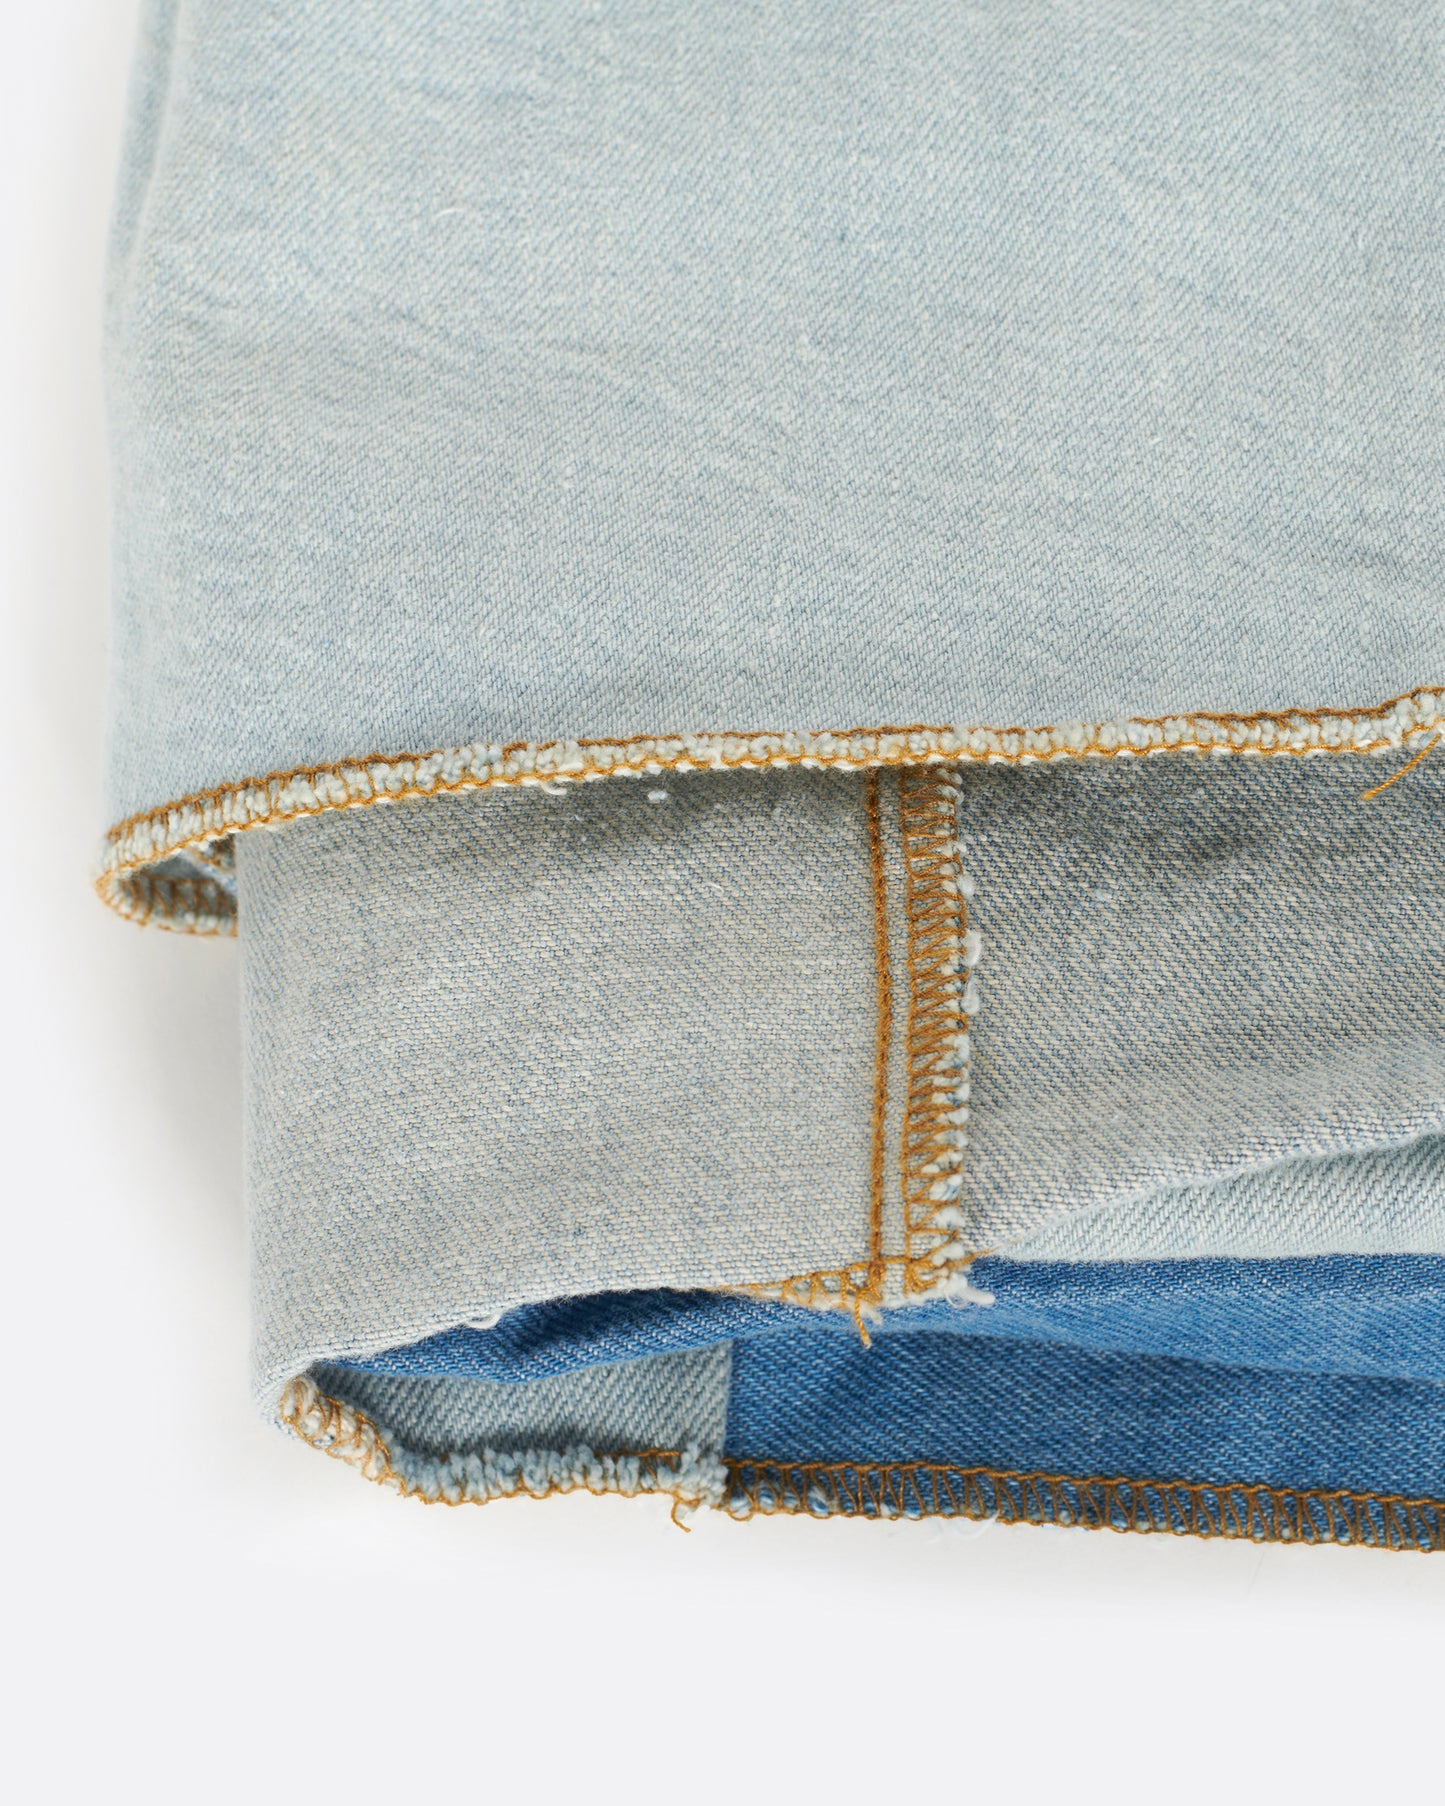 A handcrafted blanket made from pieces of dead stock denim, perfect for picnics.